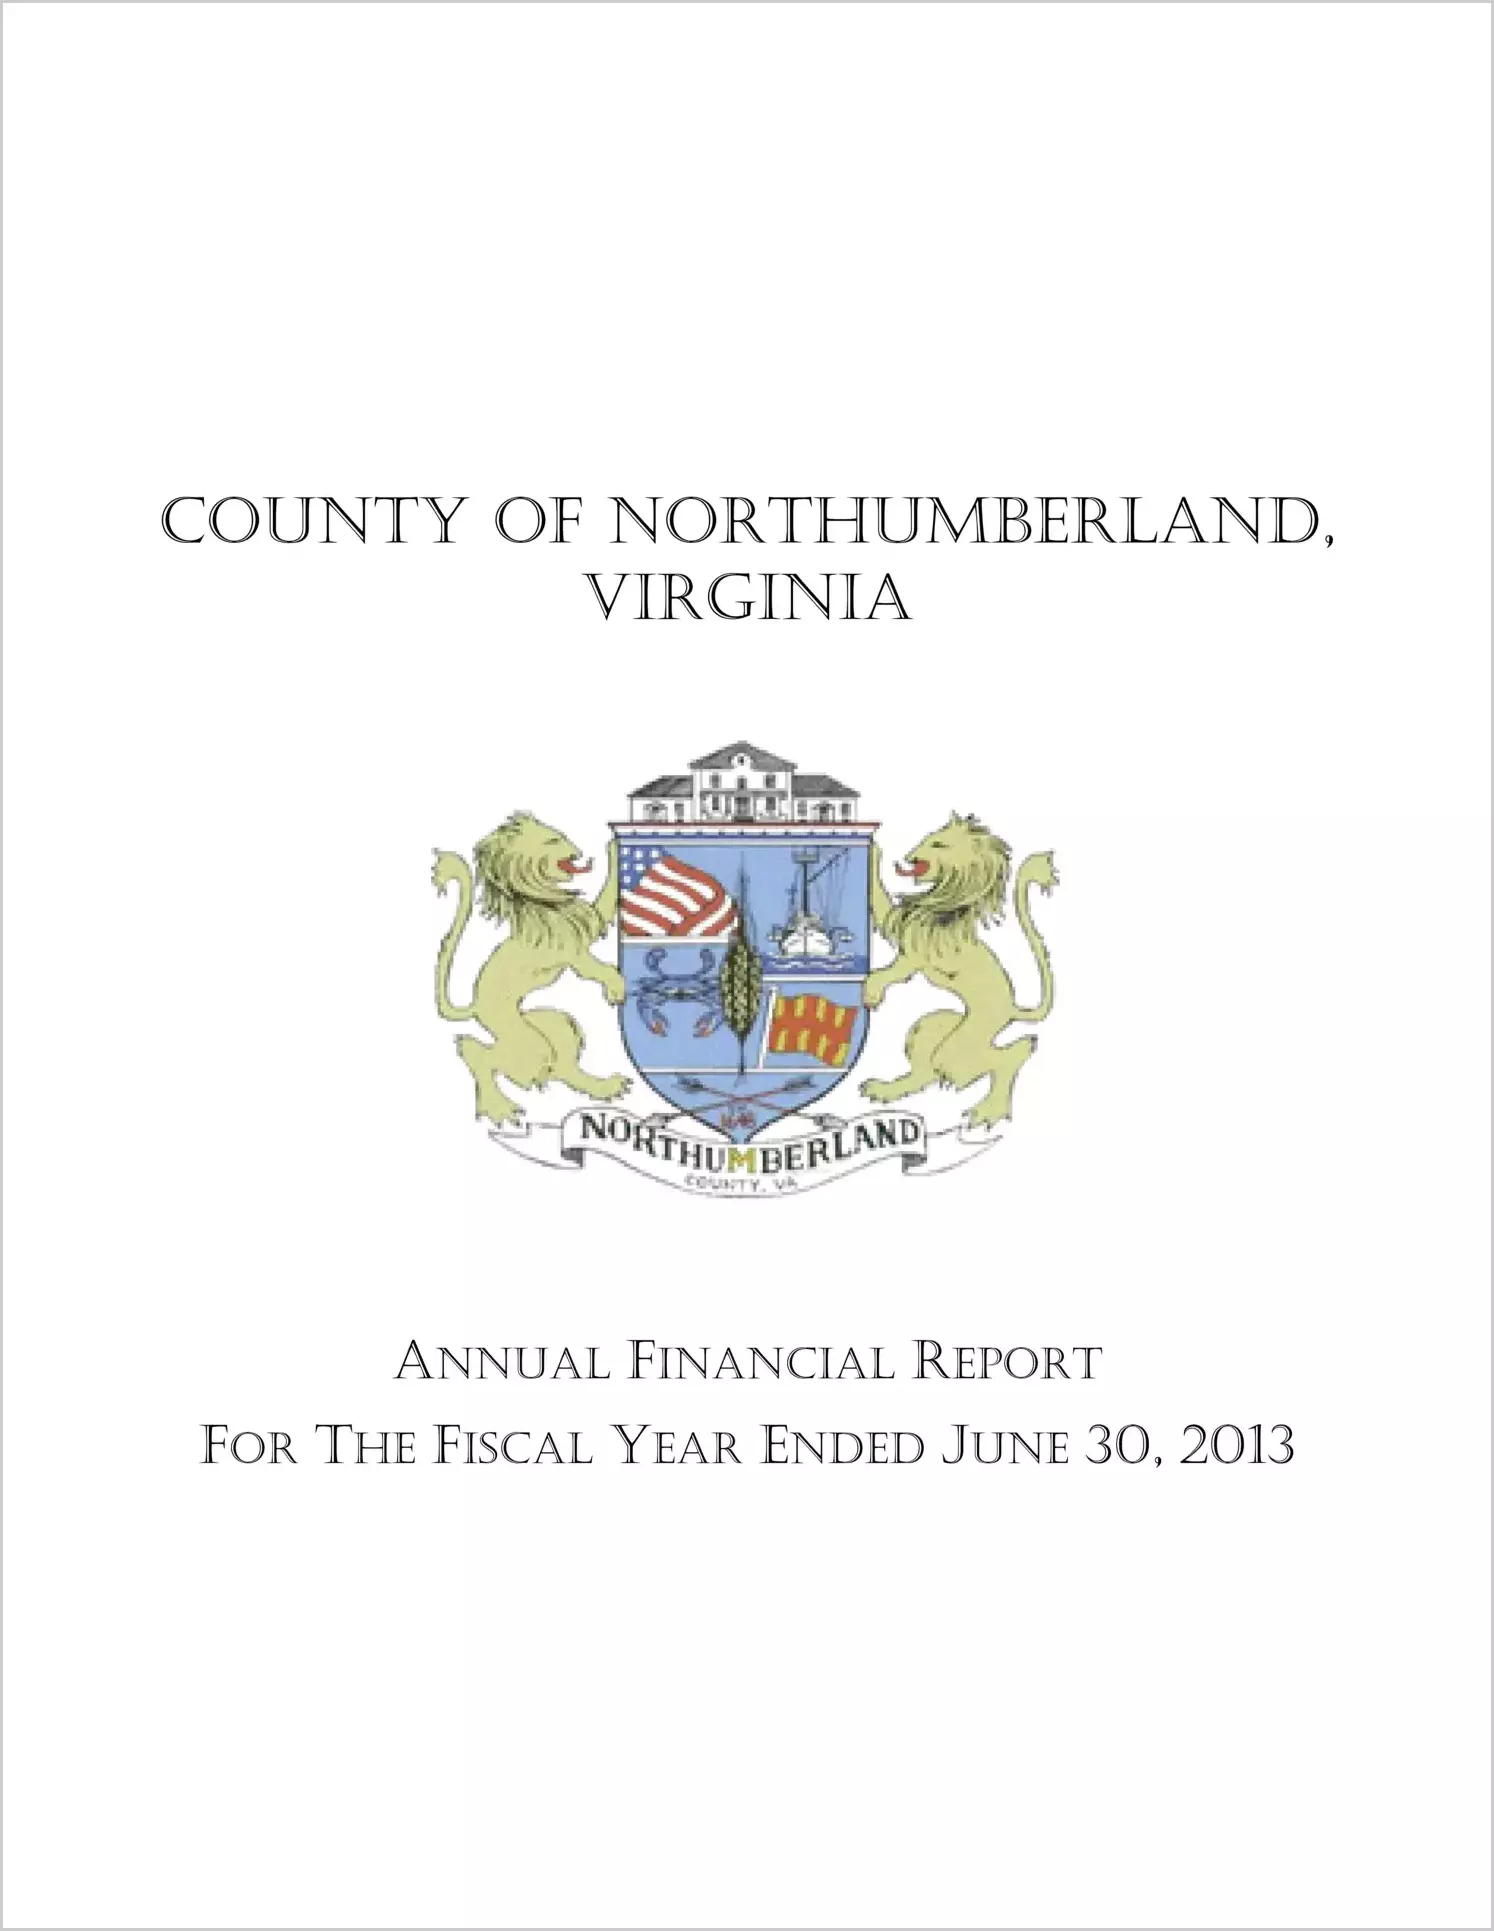 2013 Annual Financial Report for County of Northumberland